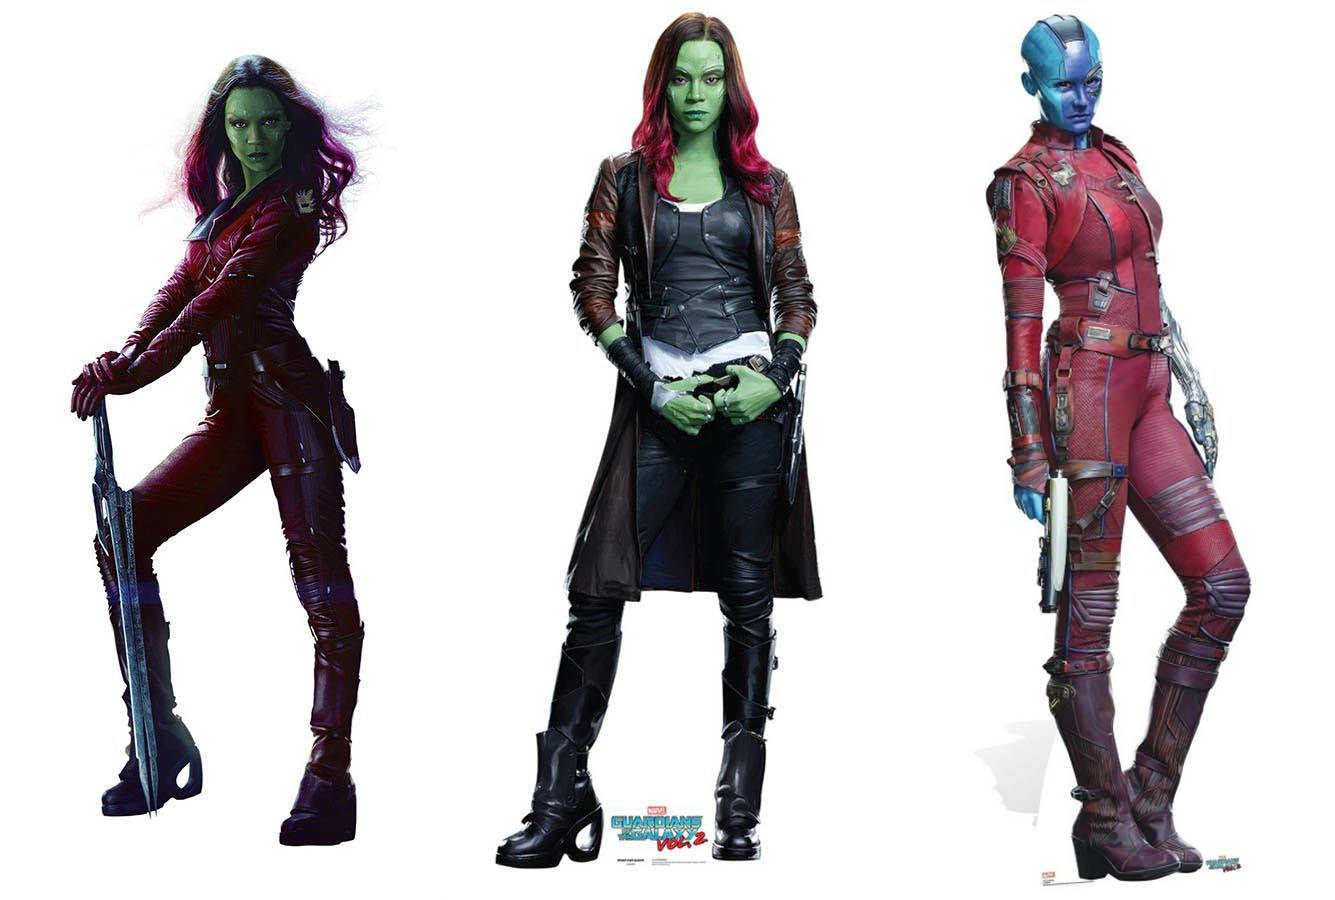 Not even Guardians of the Galaxy's Gamora and Nebula could escape high heels.